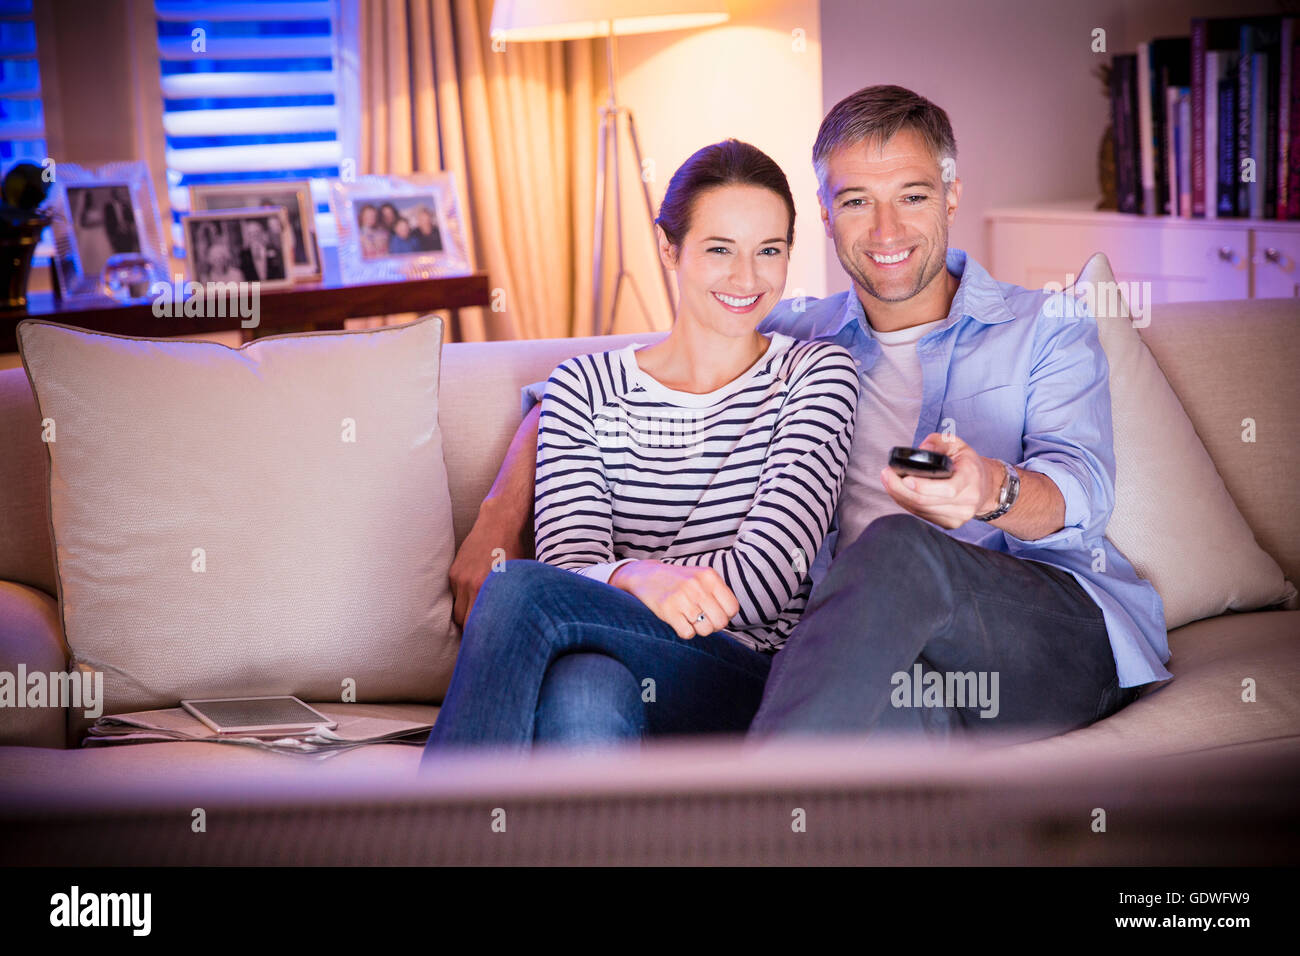 Smiling couple watching TV in living room Stock Photo